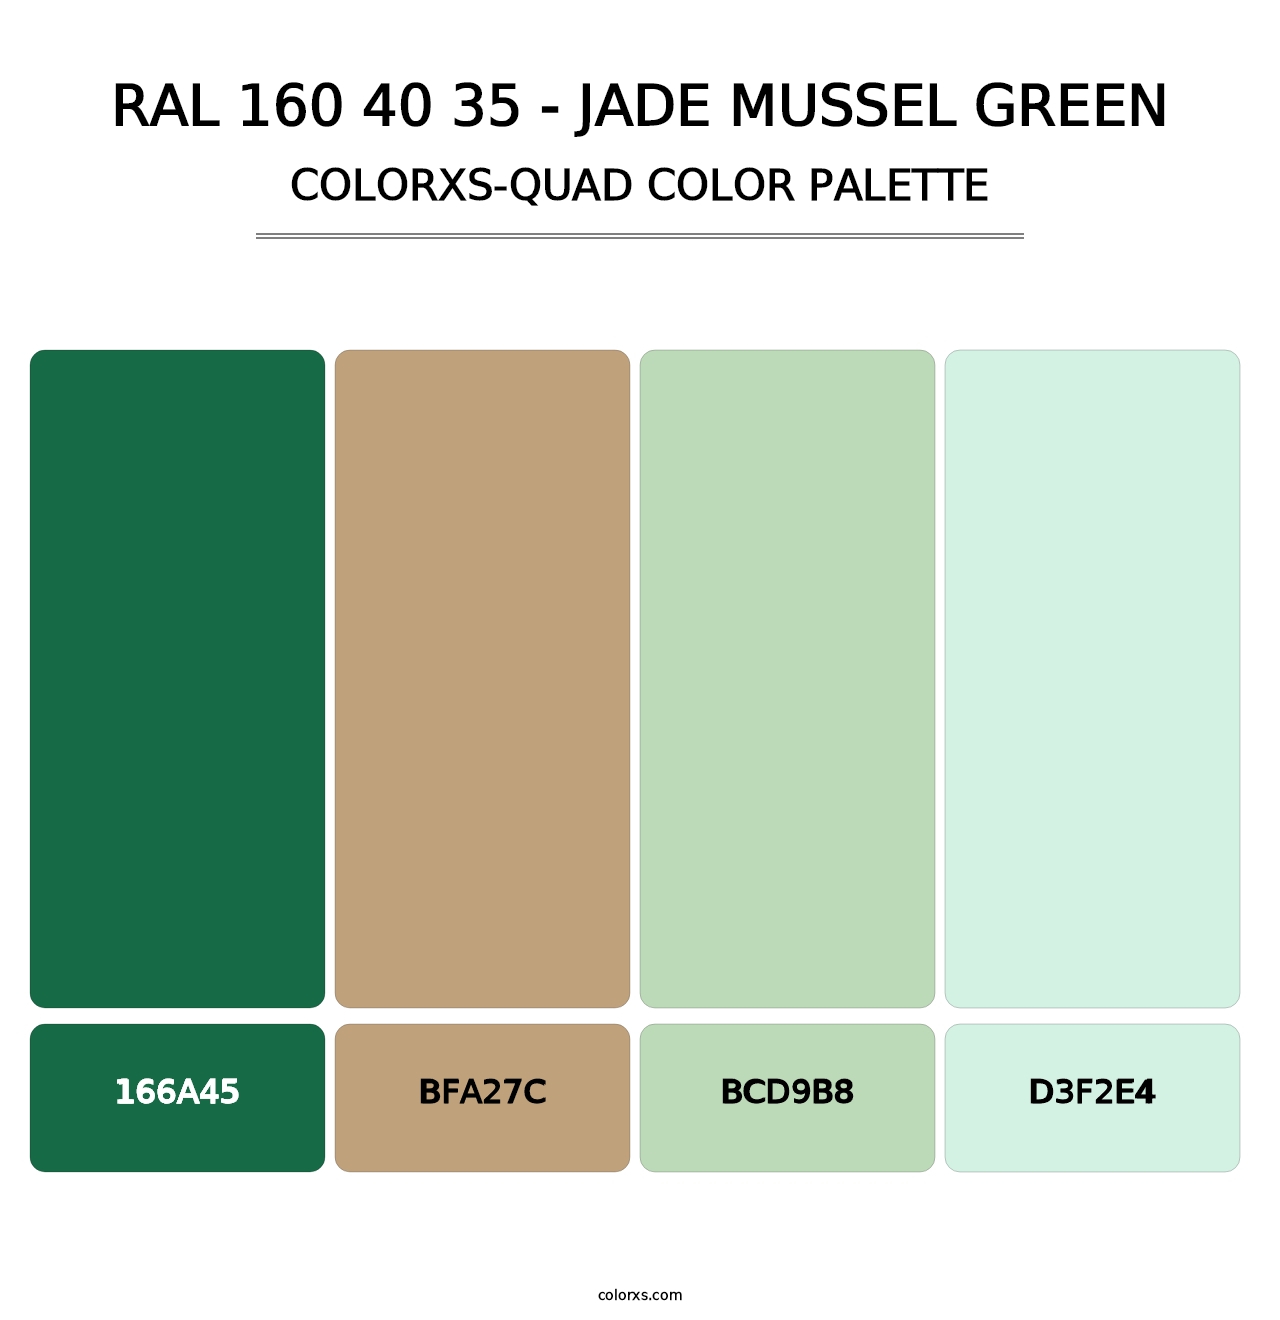 RAL 160 40 35 - Jade Mussel Green - Colorxs Quad Palette